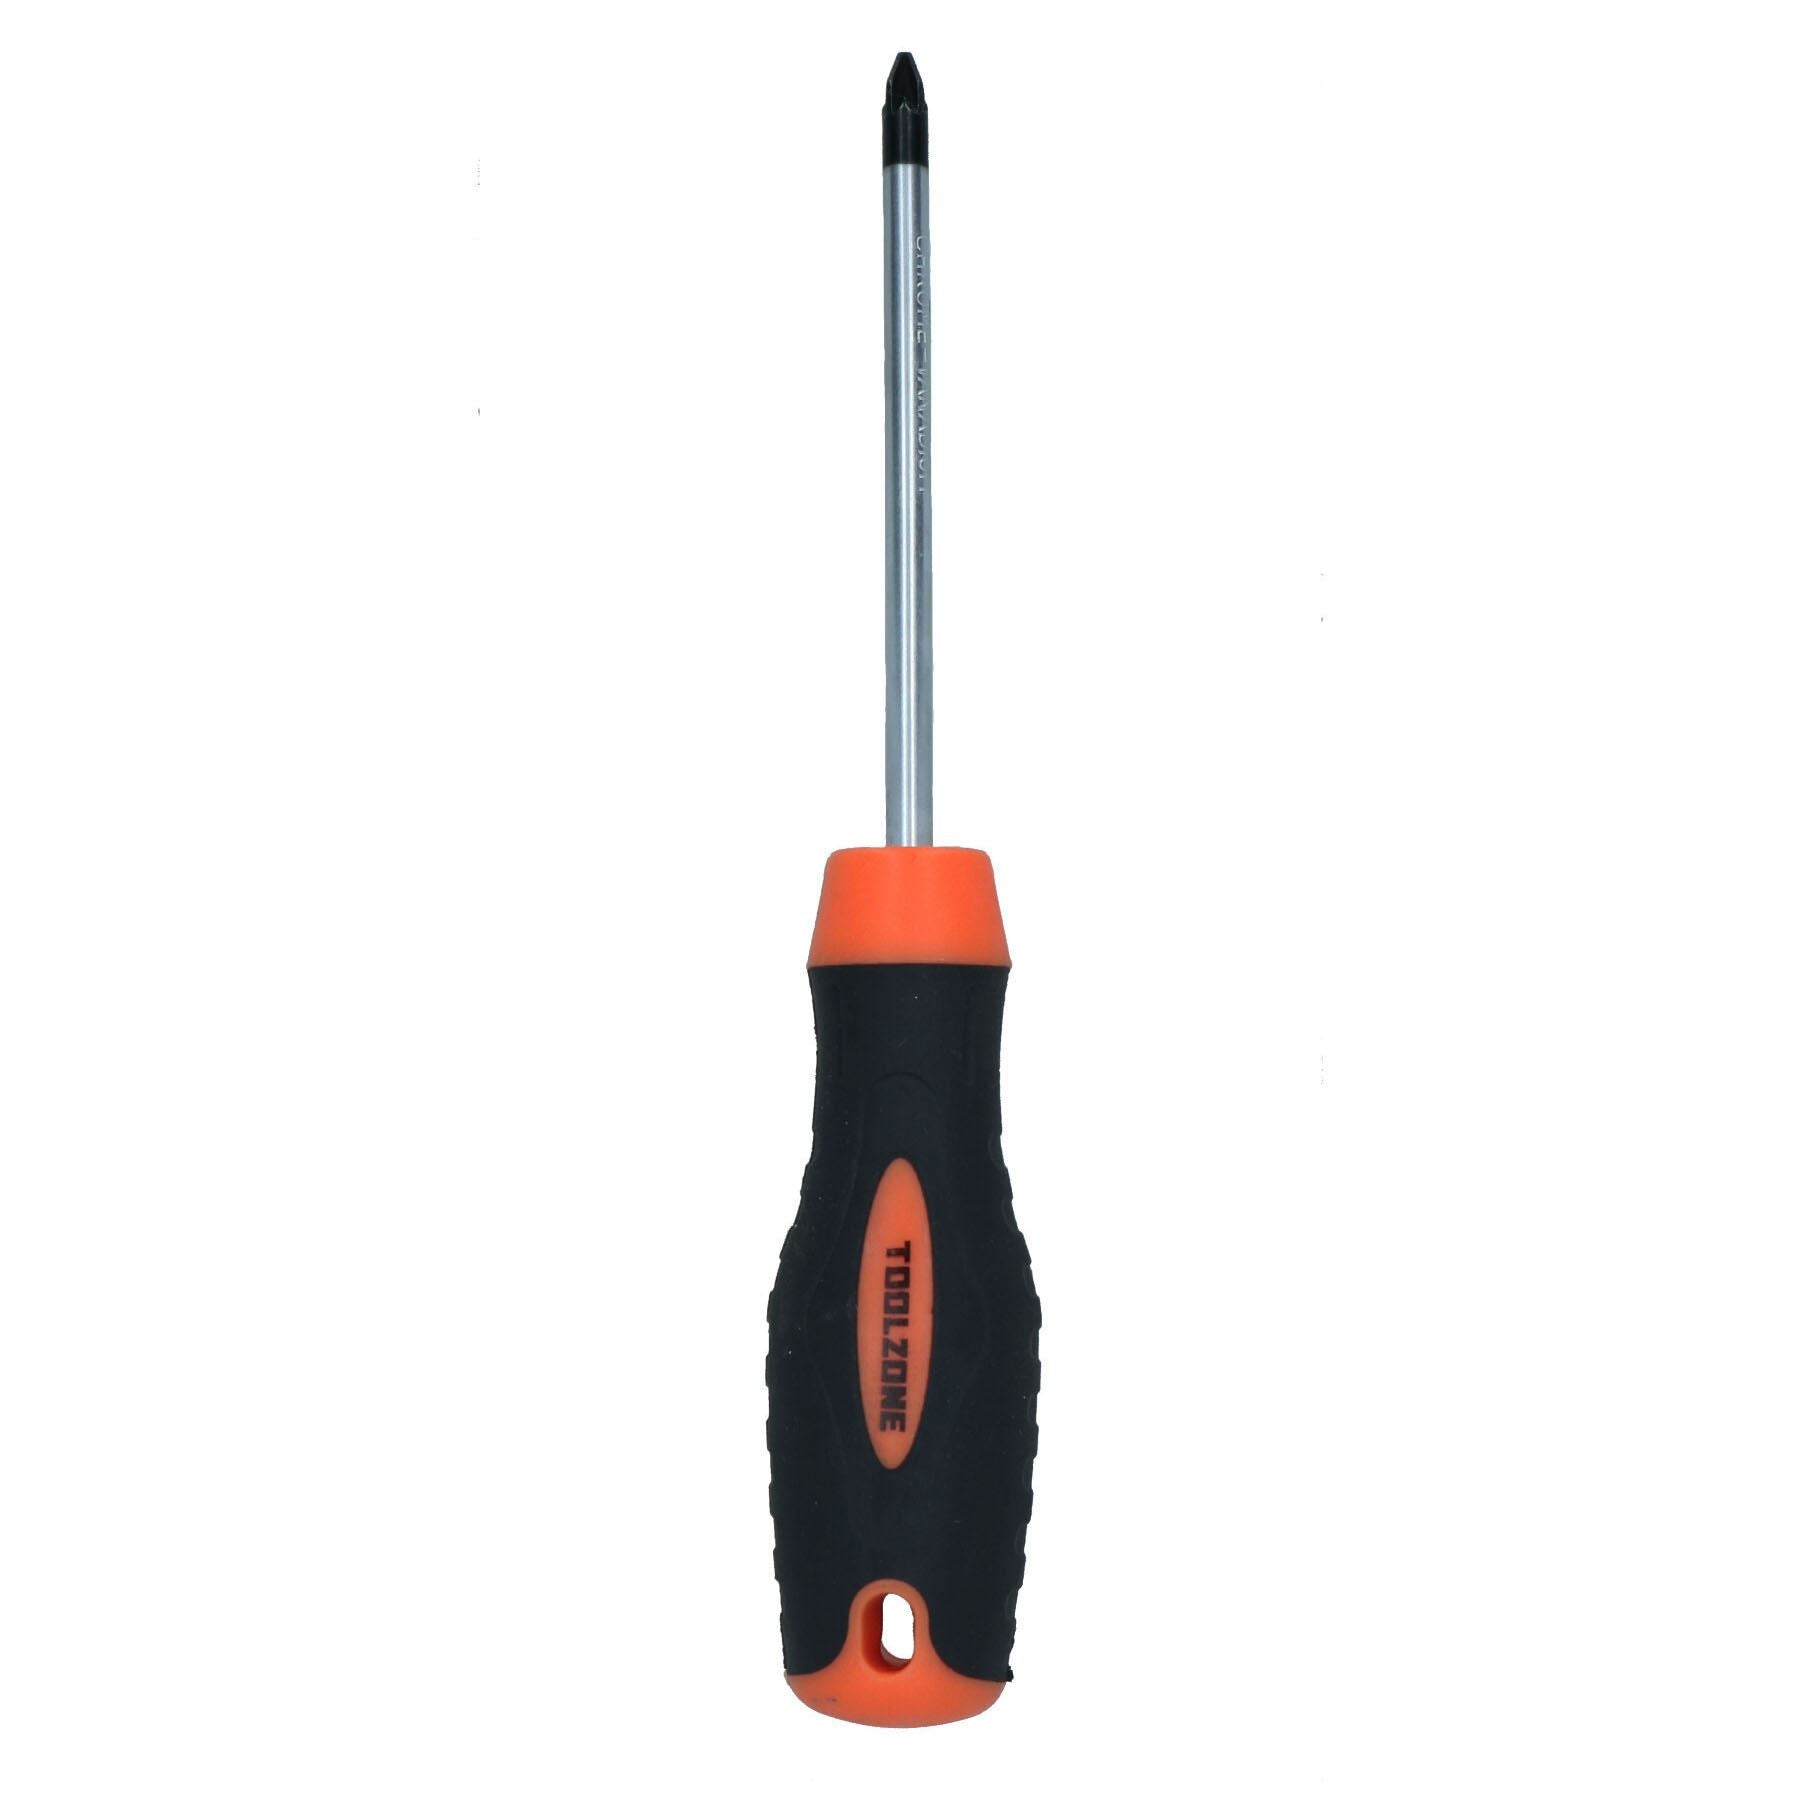 PZ2 x 100mm Pozi headed Screwdriver With magnetic Tip + Rubber Grip Handle